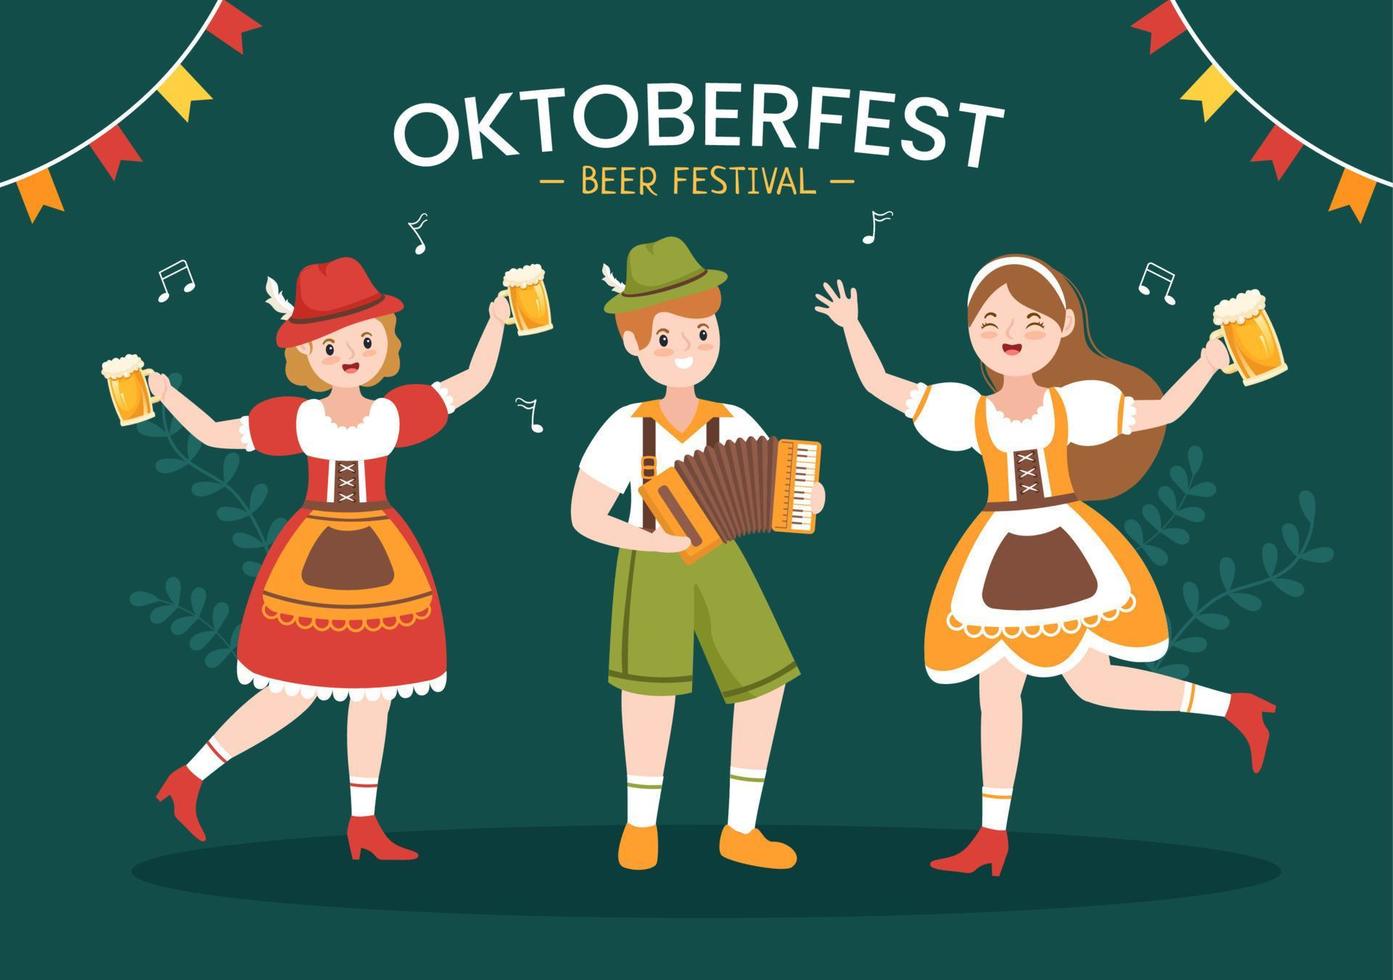 Oktoberfest Festival Cartoon Illustration with Bavarian Costume Holding Beer Glass while Dancing in Traditional German in Flat Style Design vector